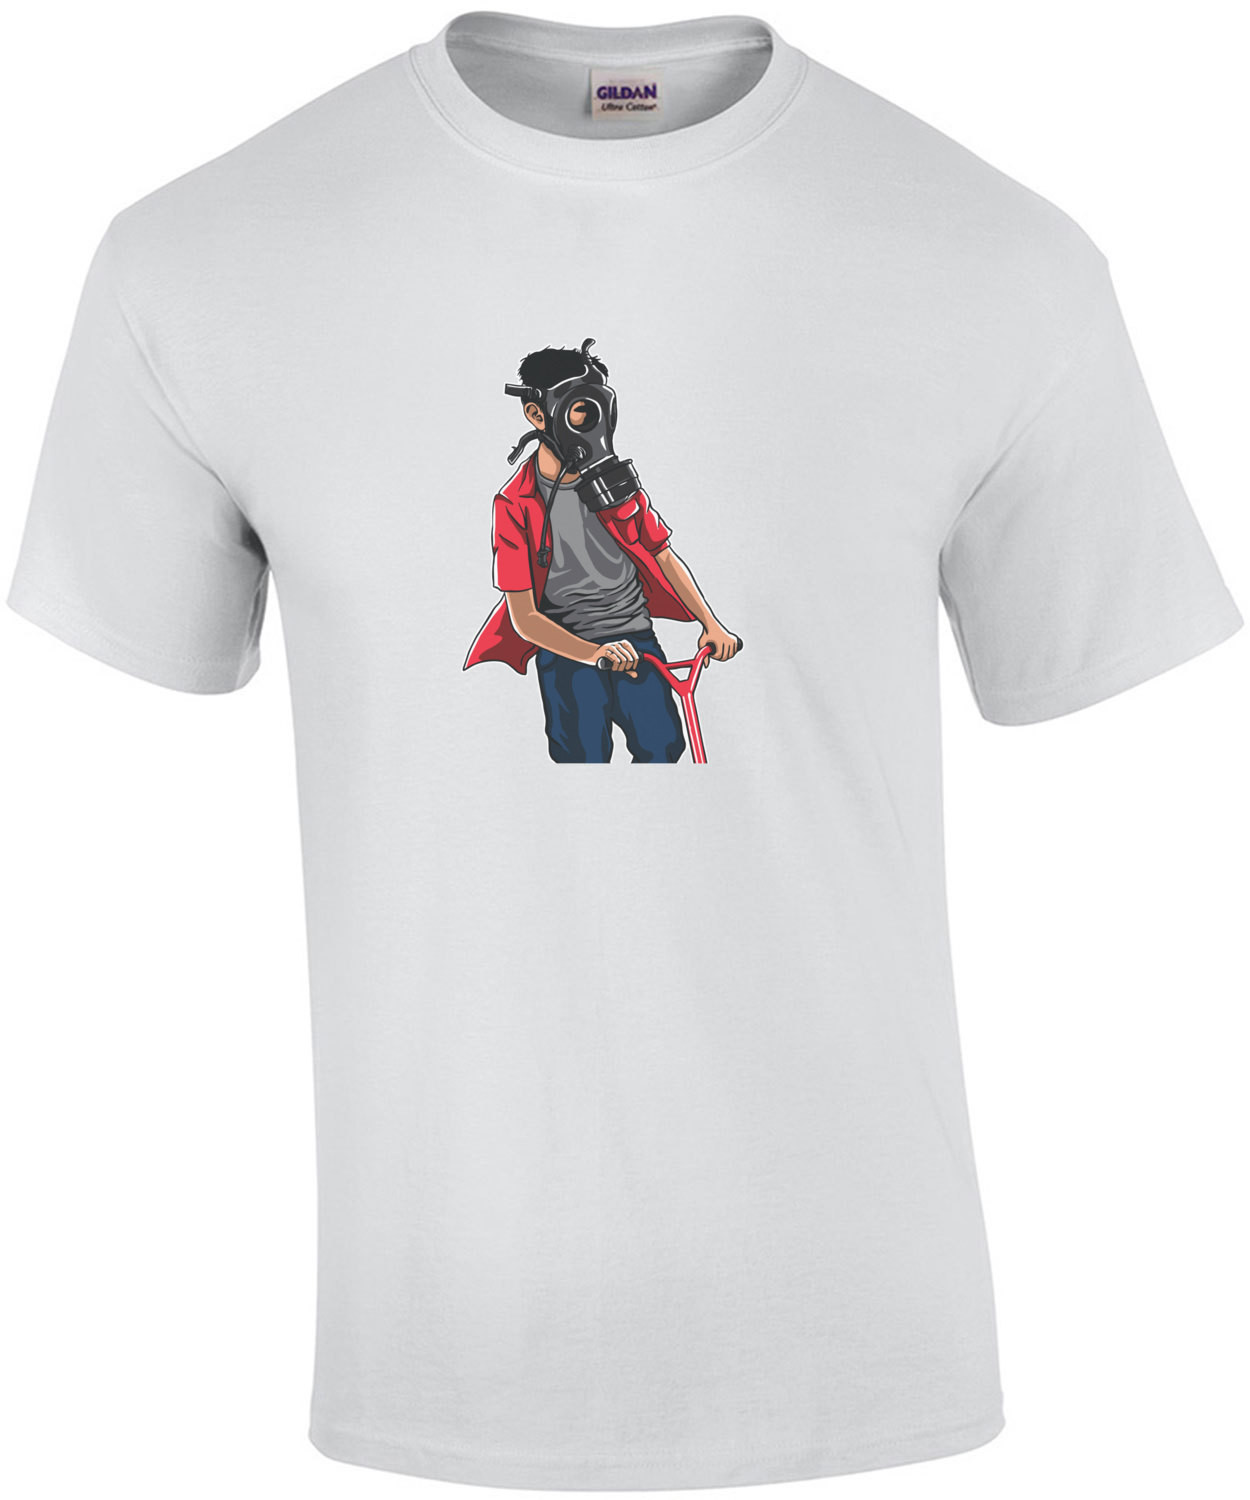 Scooter Kid Wearing Gas Mask Creepy Apocalytpic T-Shirt